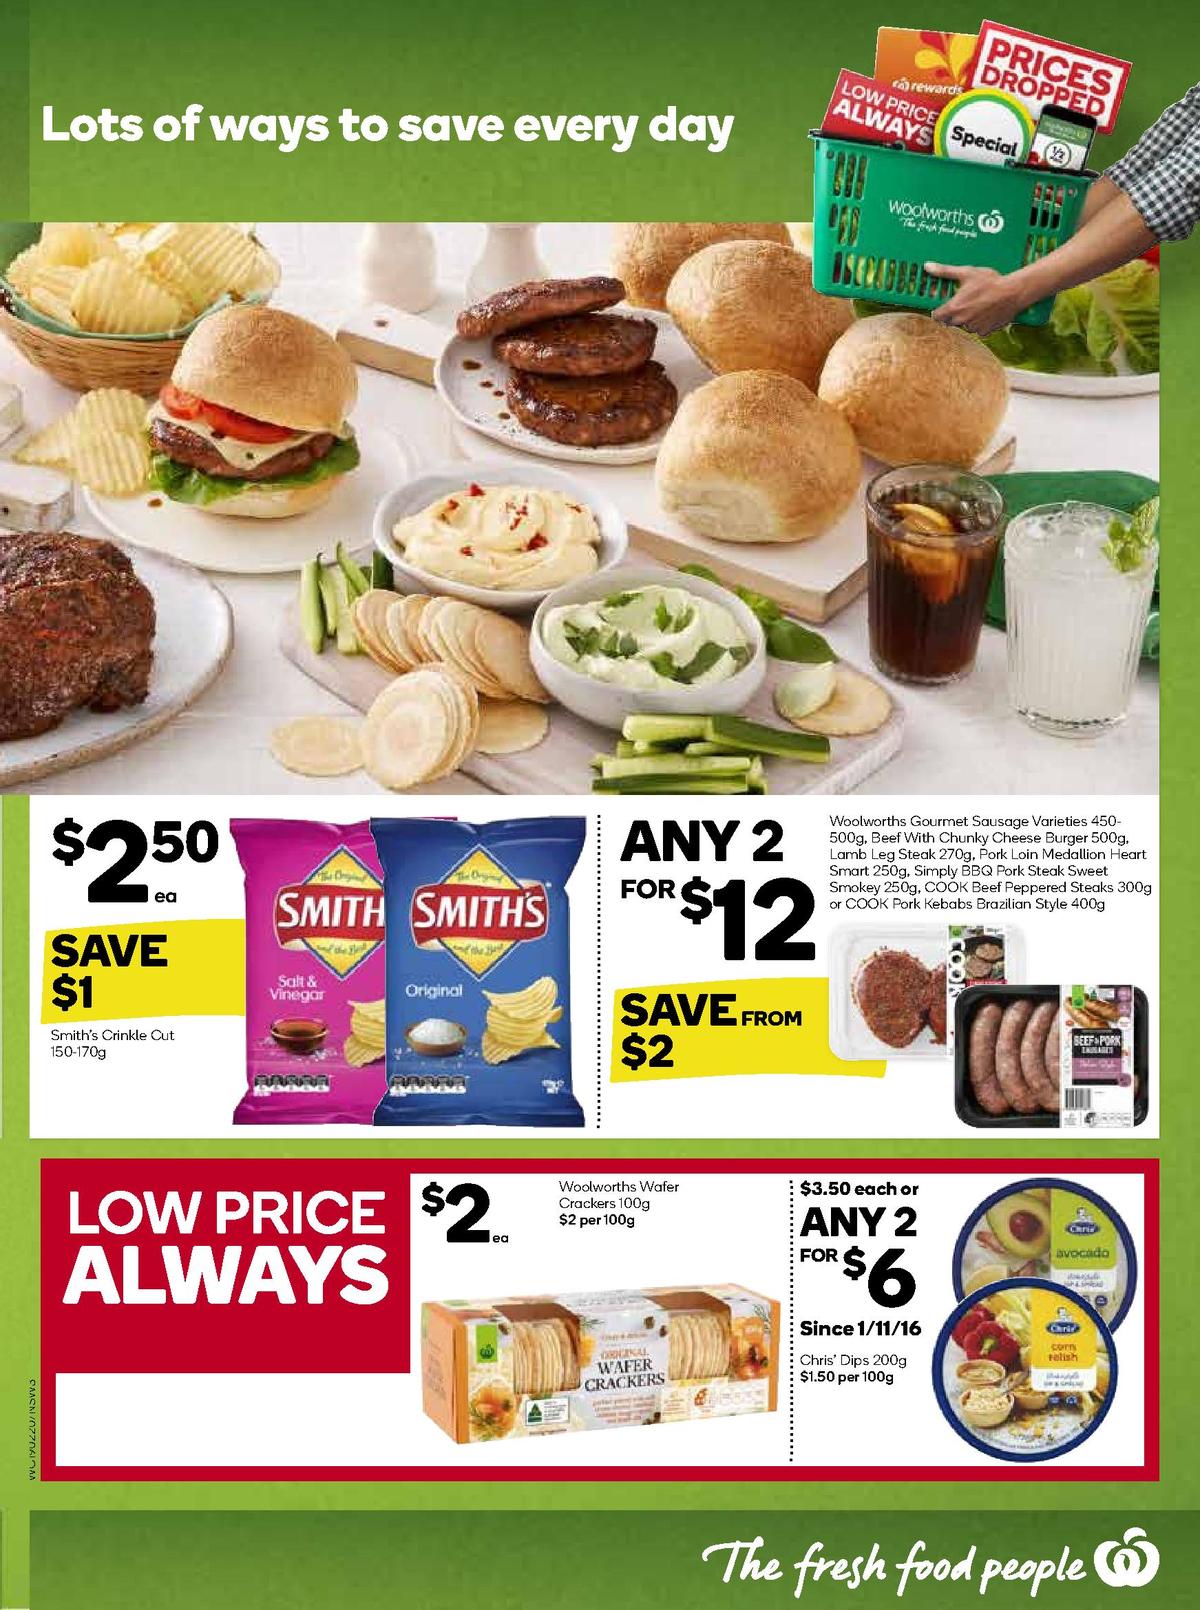 Woolworths Catalogues from 19 February